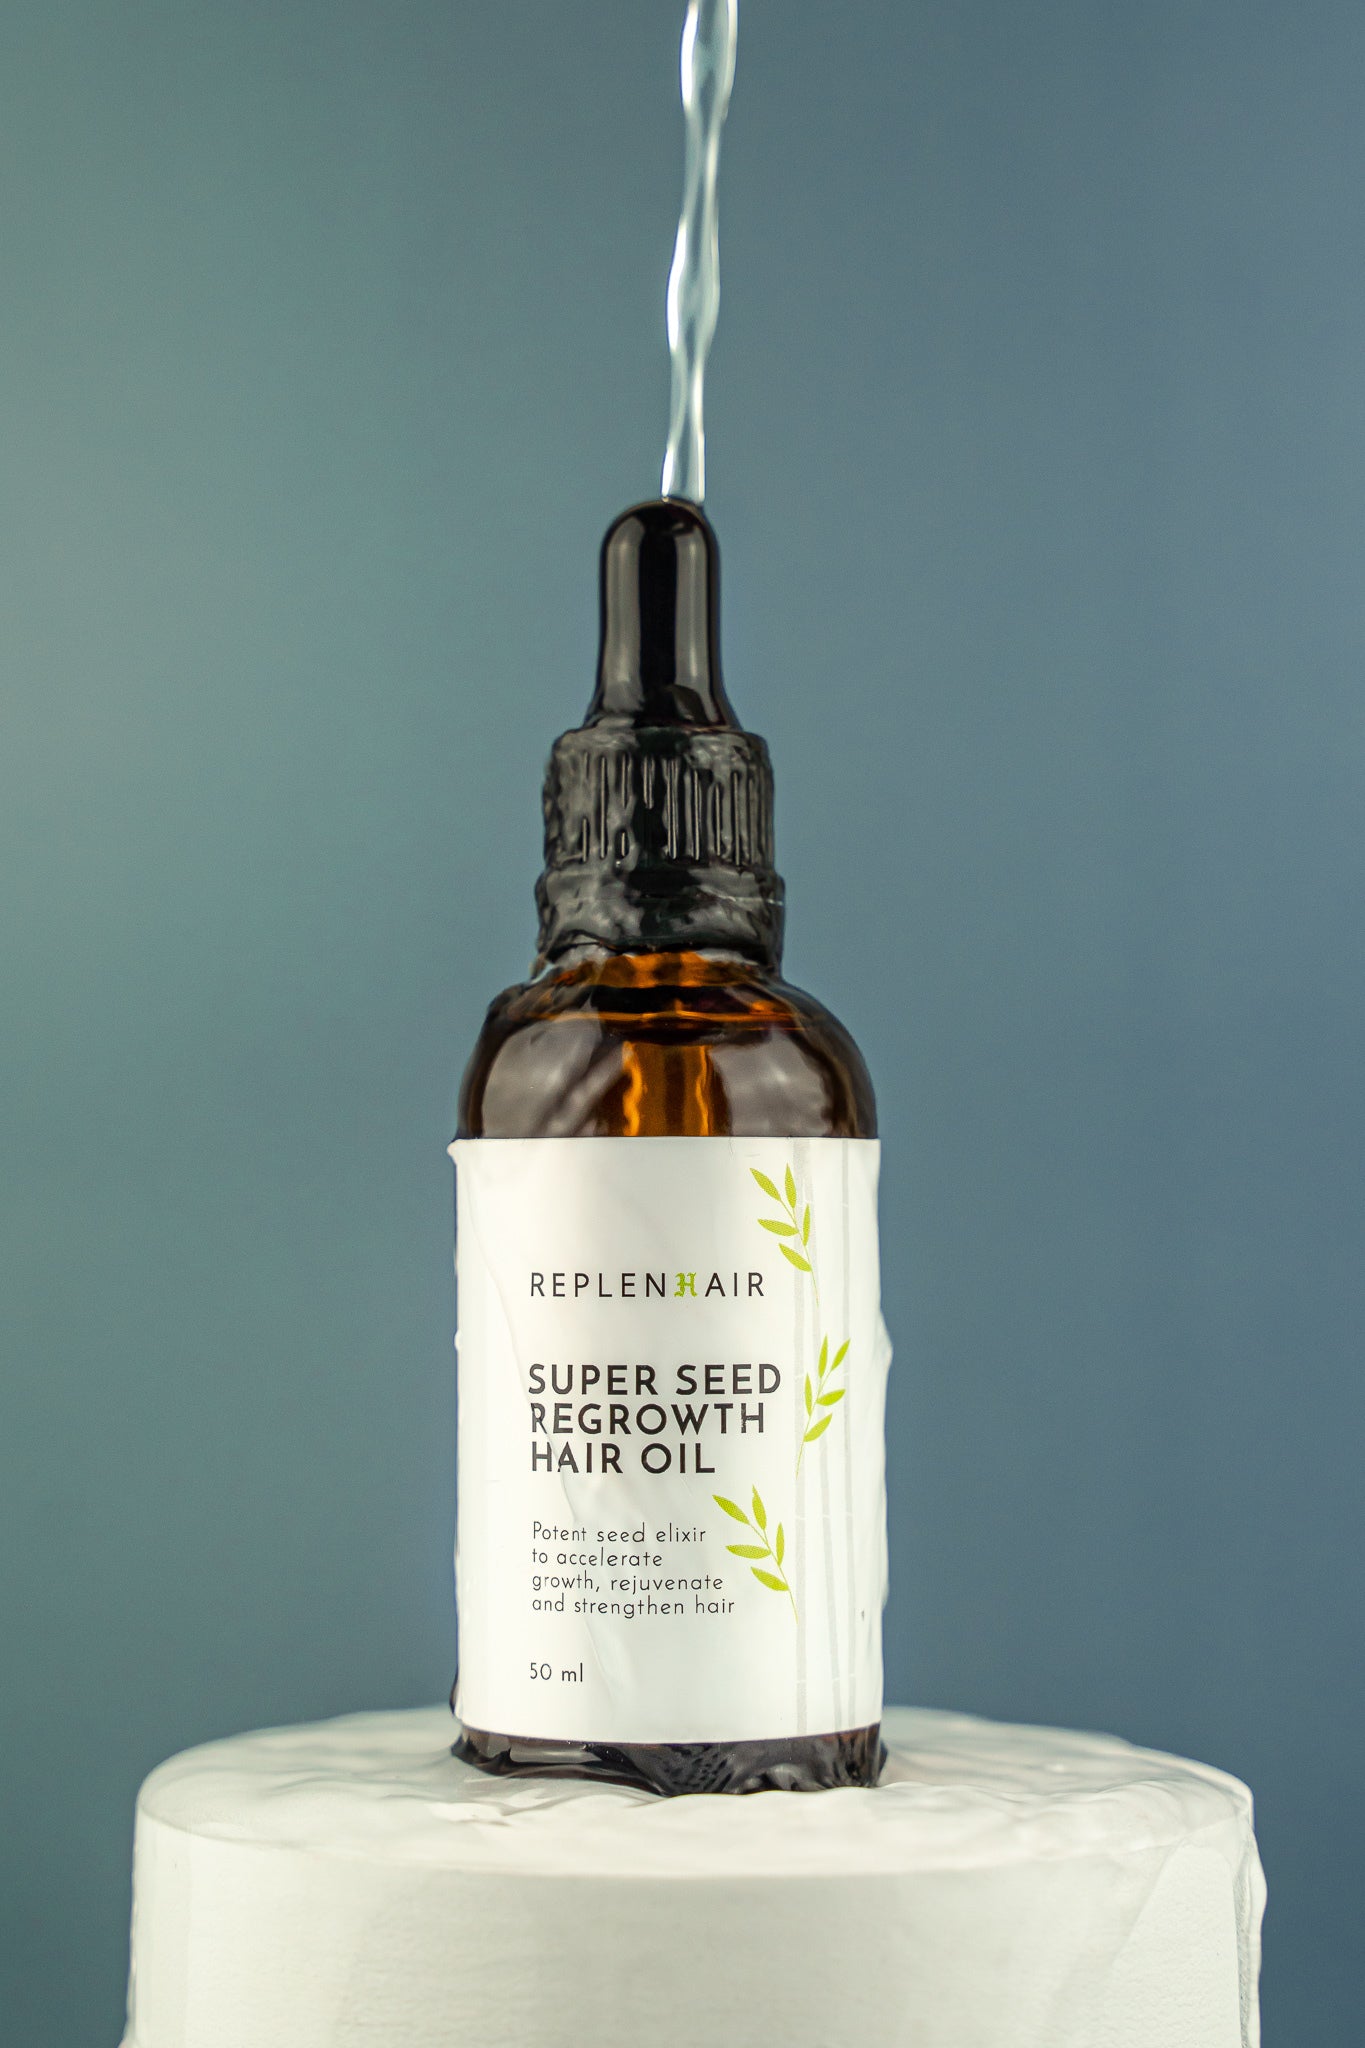 Product shoot for Replenhair Super Seed Regrowth Hair Oil